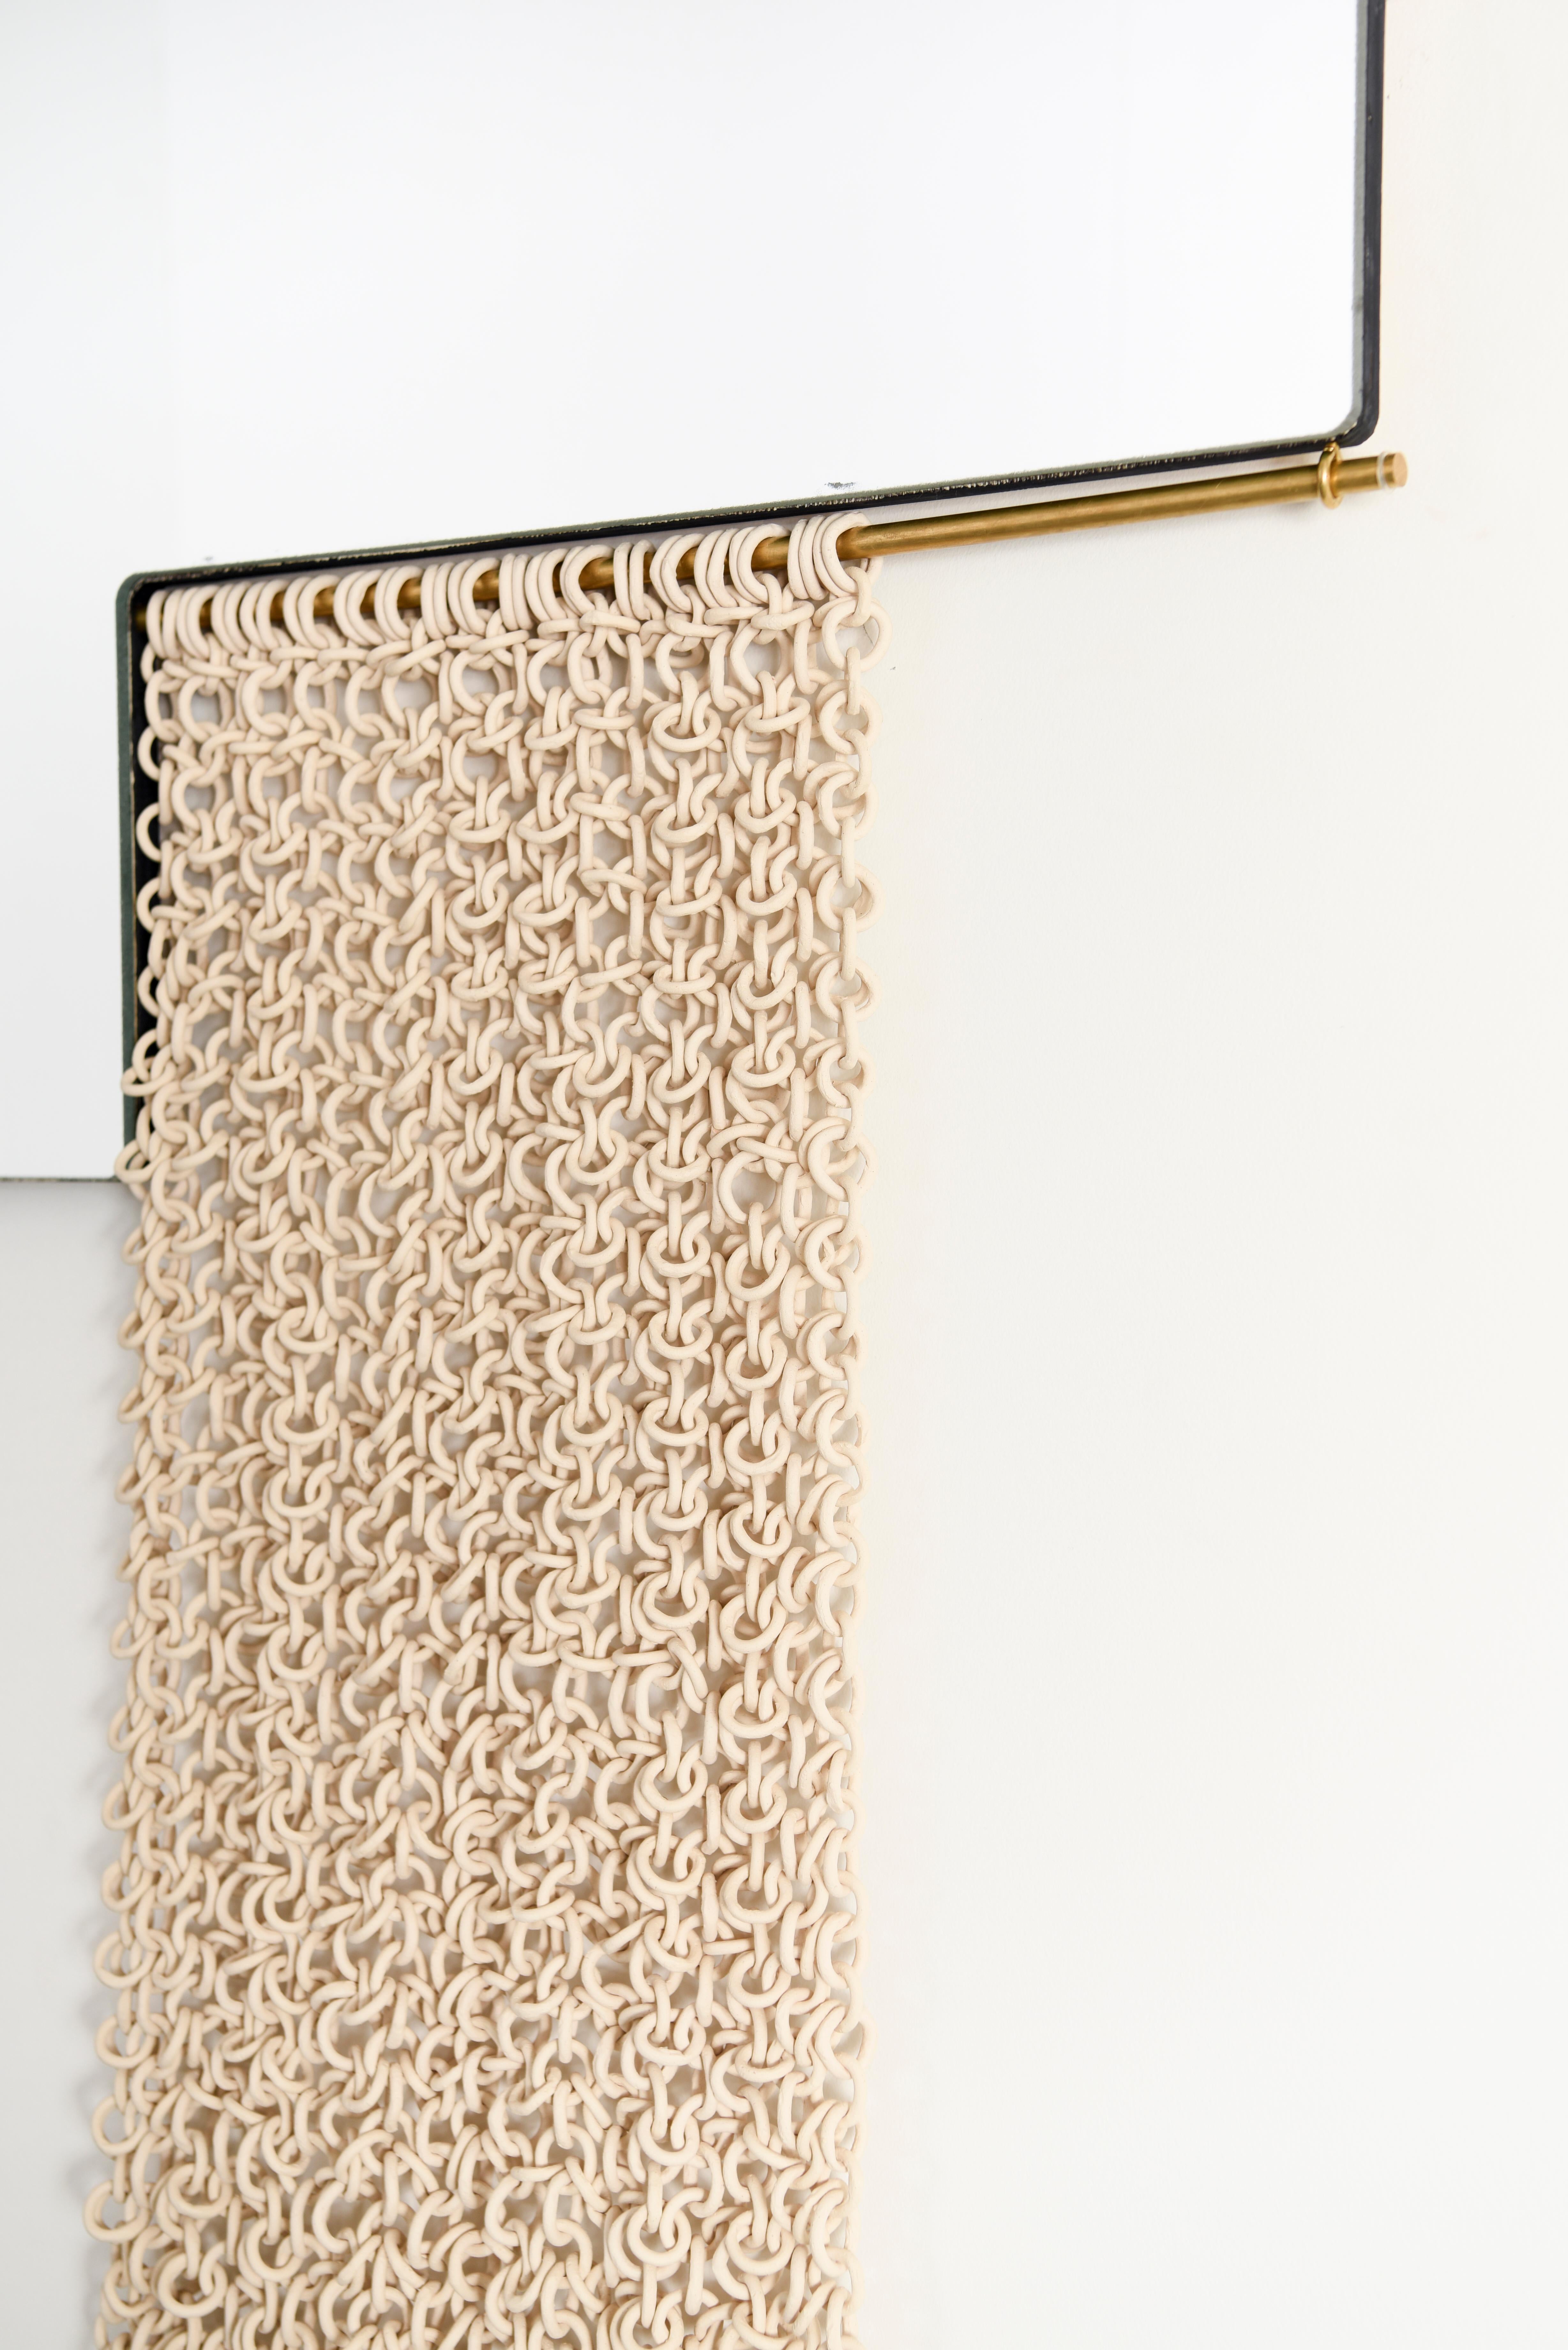 The L-Mirrors are a set of sculptural mirrors with brass rods that hold ceramic chainmail curtains. The ceramic chainmail has been individually handmade, creating an organic fabric contrasting the geometry of the mirrors. 


The mirrors are 30